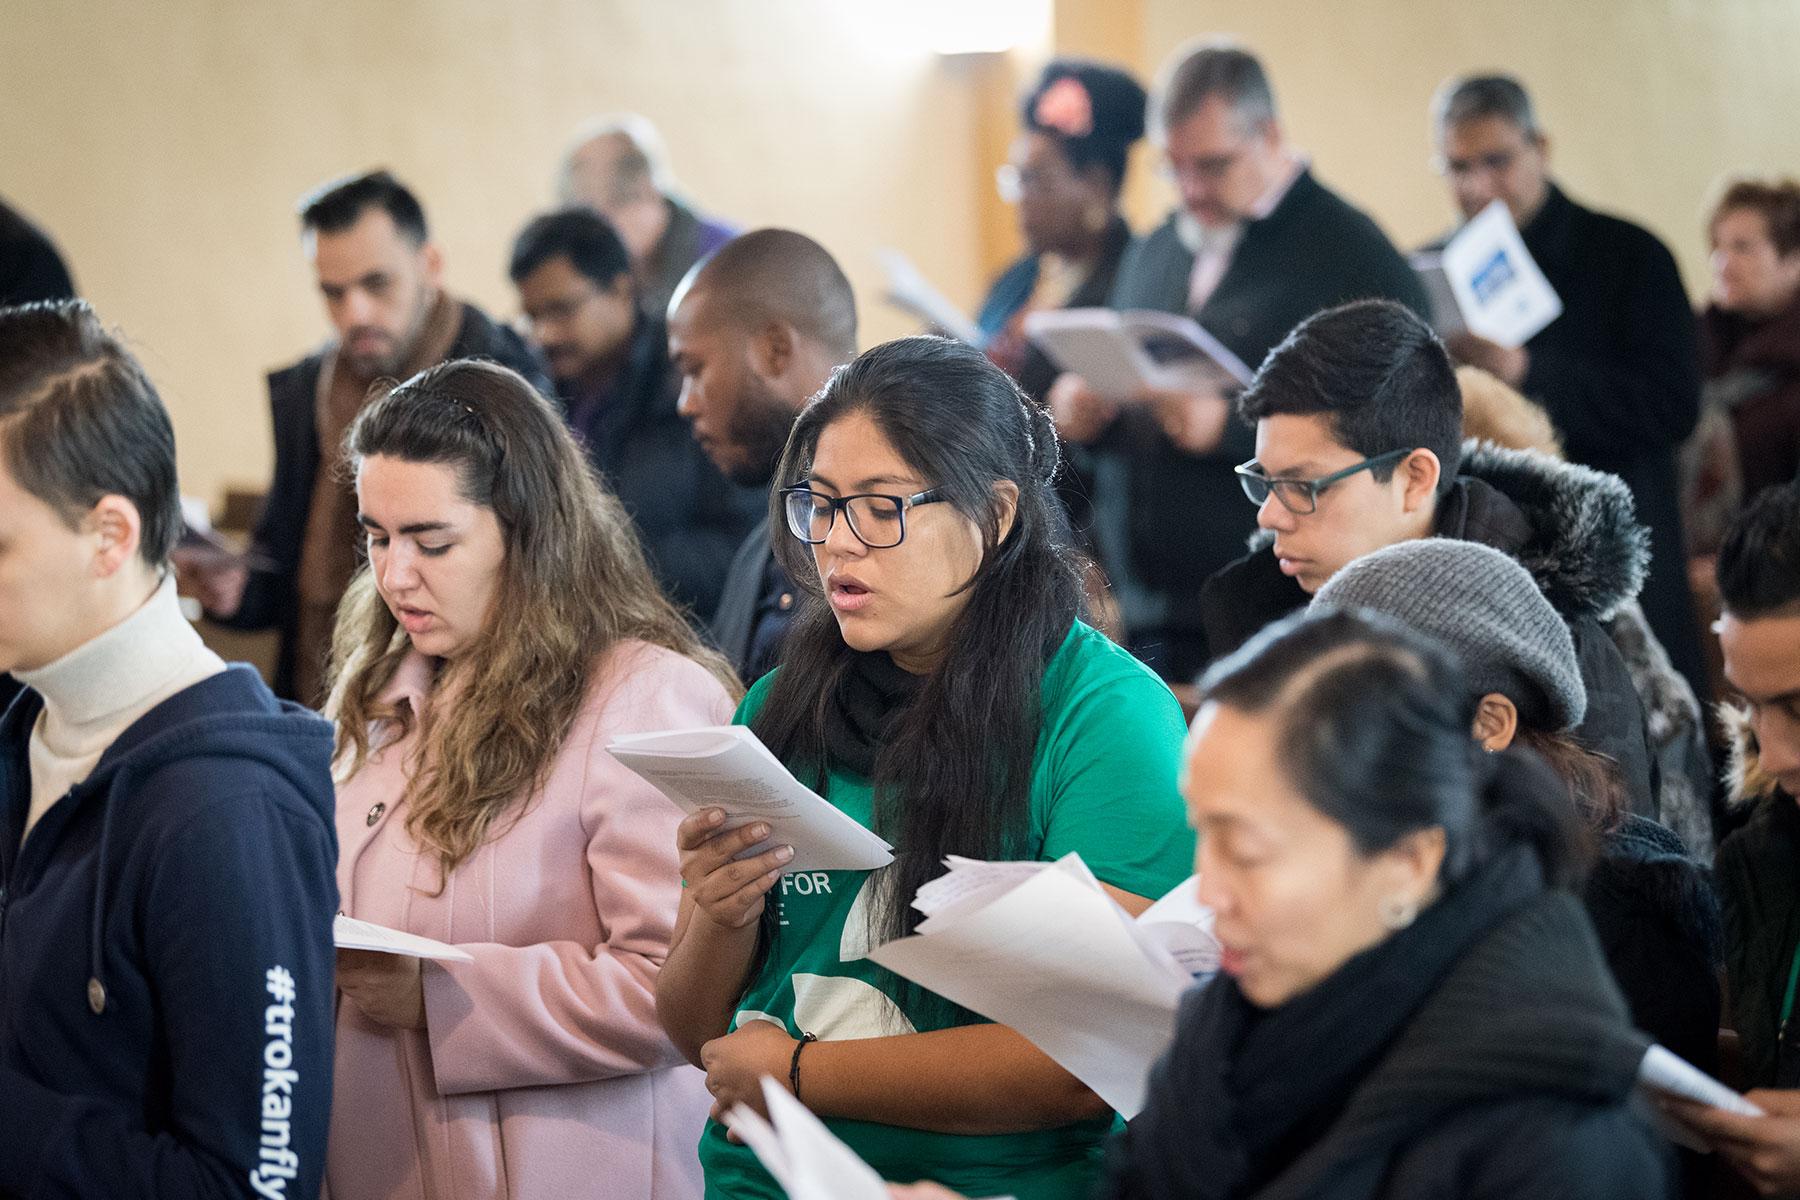 LWF Youth Delegation at COP 25 in Madrid attending a worship service. Photo: LWF/A. Hillert